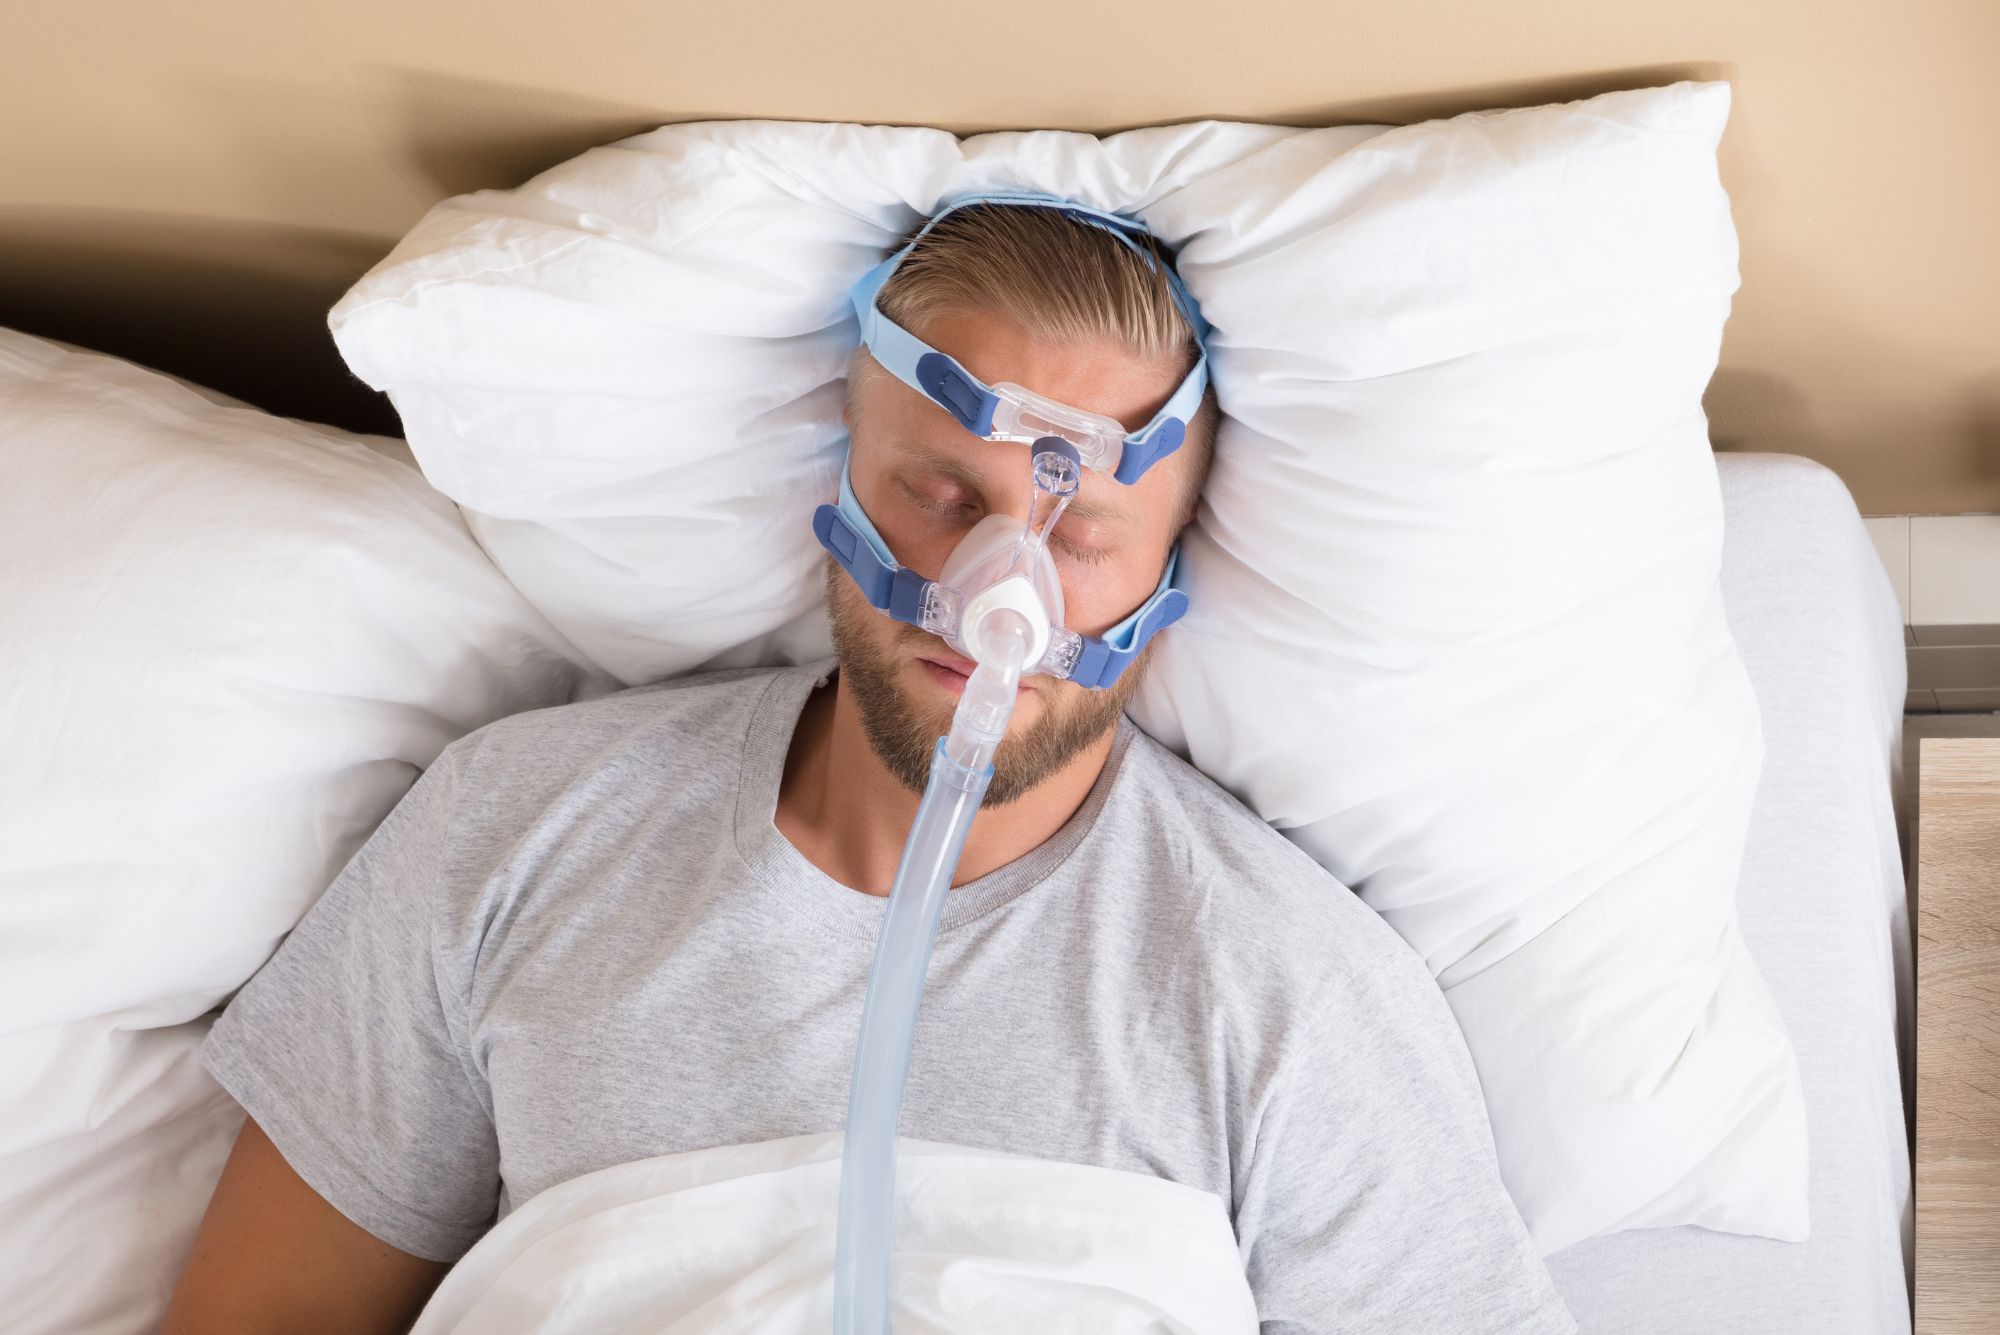 A man sleeping in bed with a CPAP machine, struggling with sleep apnea.